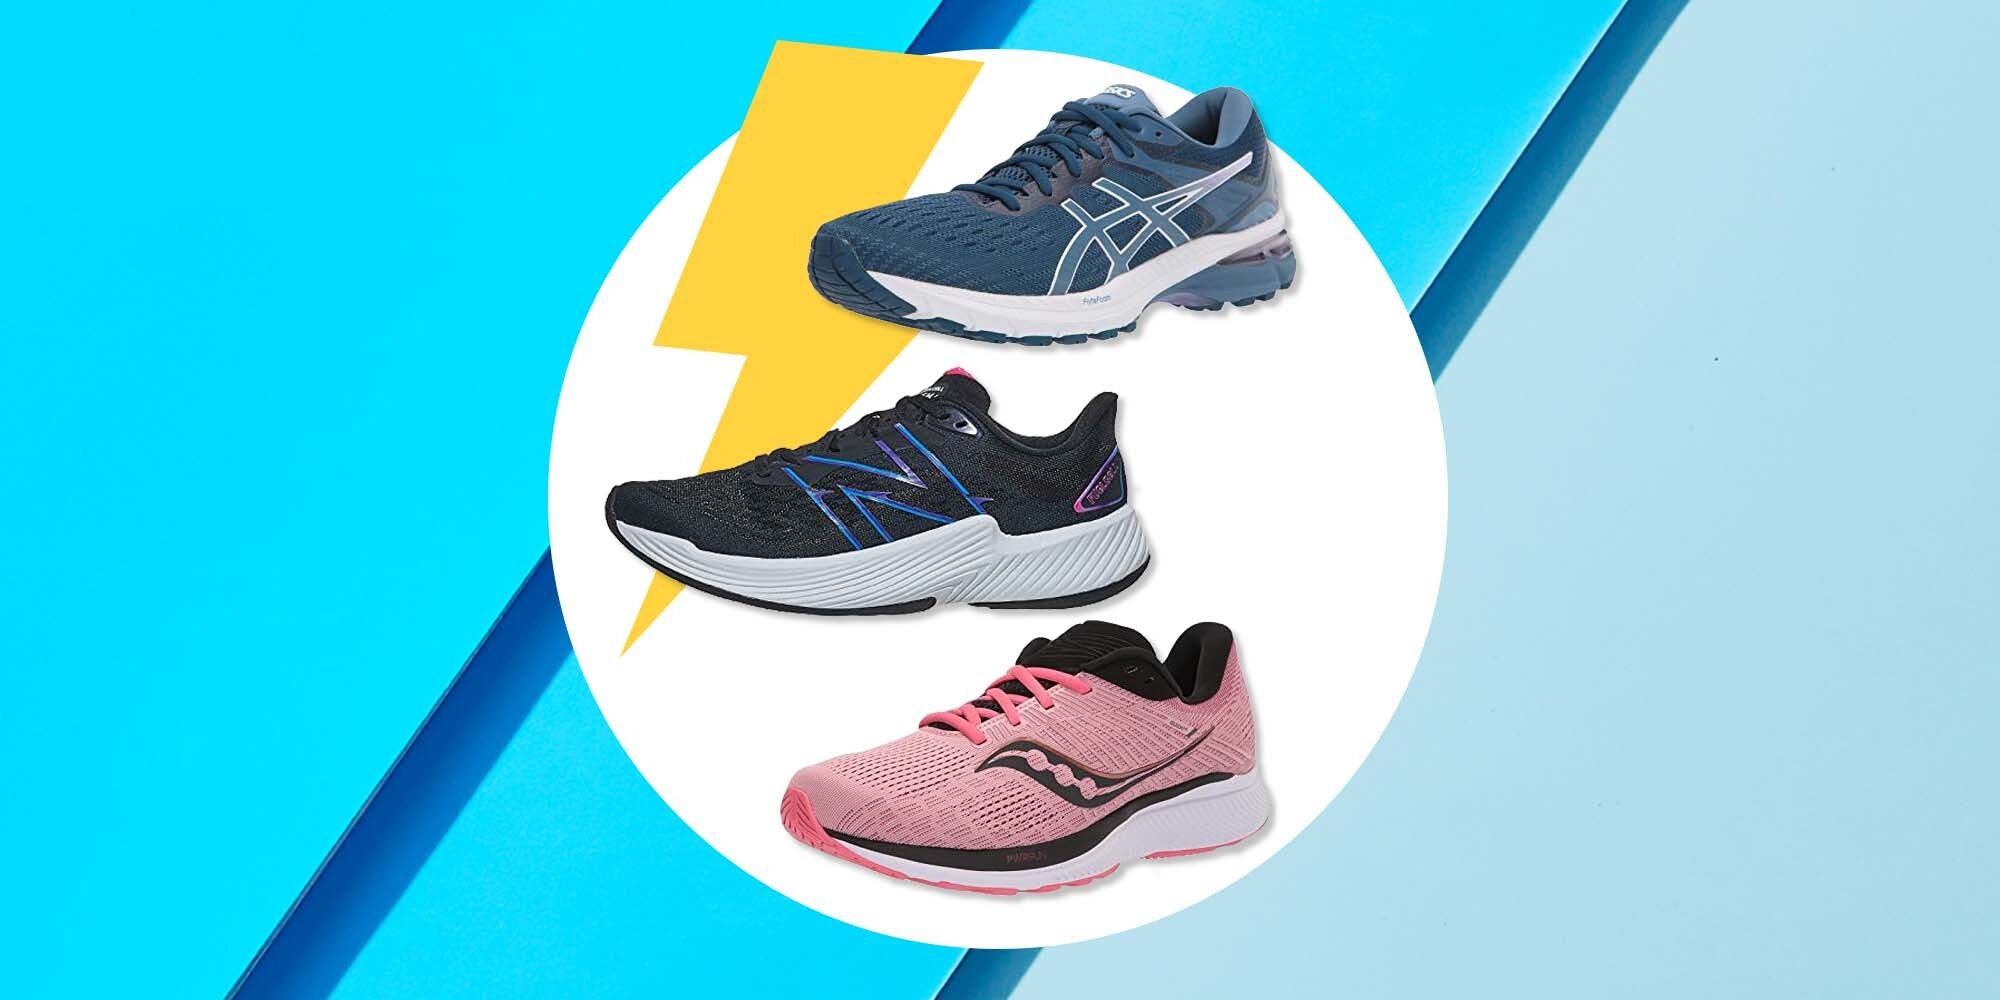 Best Supportive Running Shoes For Flat Feet In 2022, Per Podiatrists And Experts